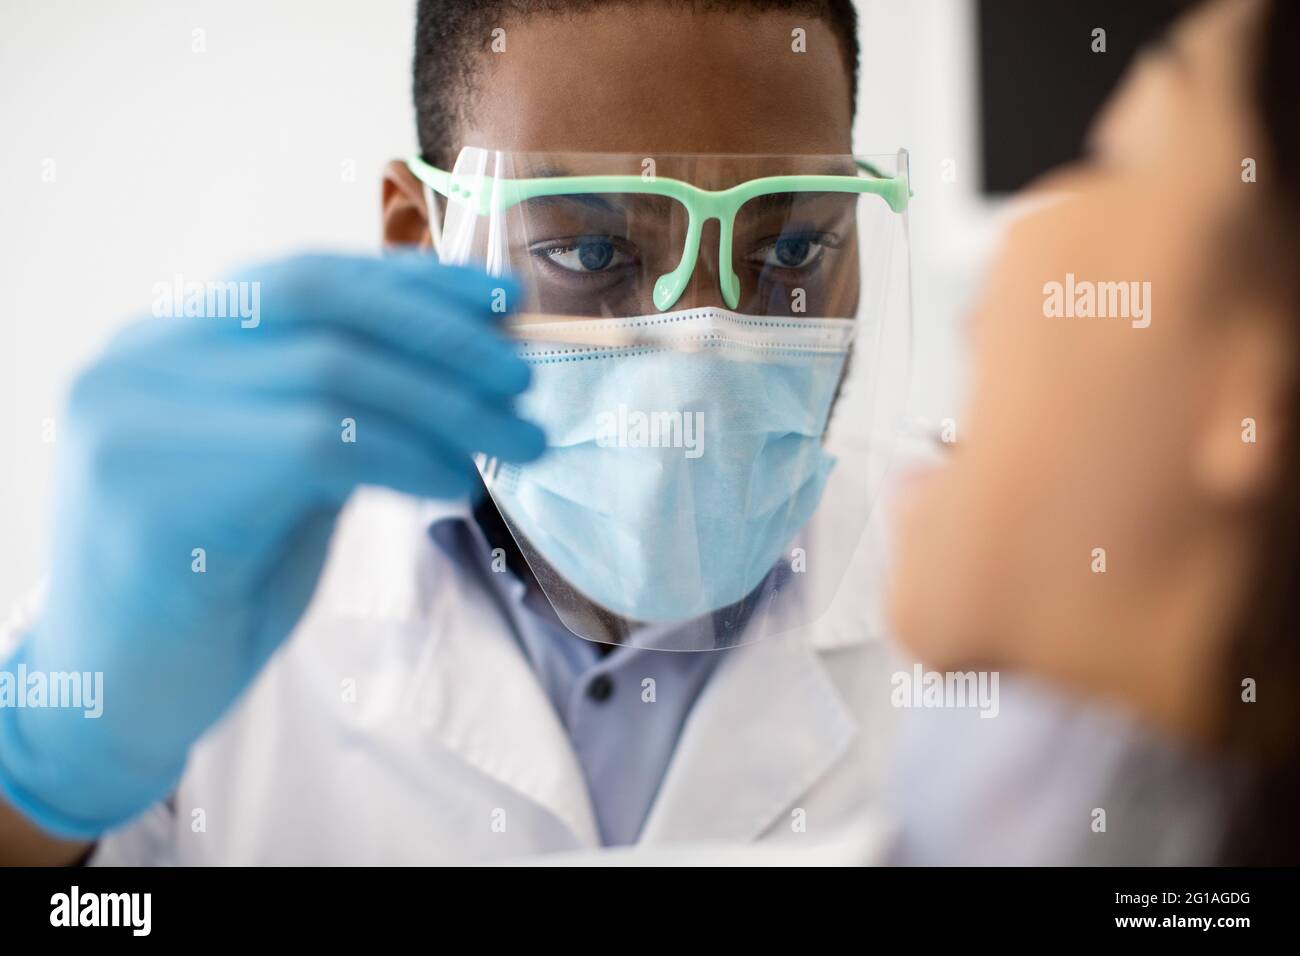 Black Male Dentist In Protective Mask And Face Shield Examining Patient's Teeth Stock Photo